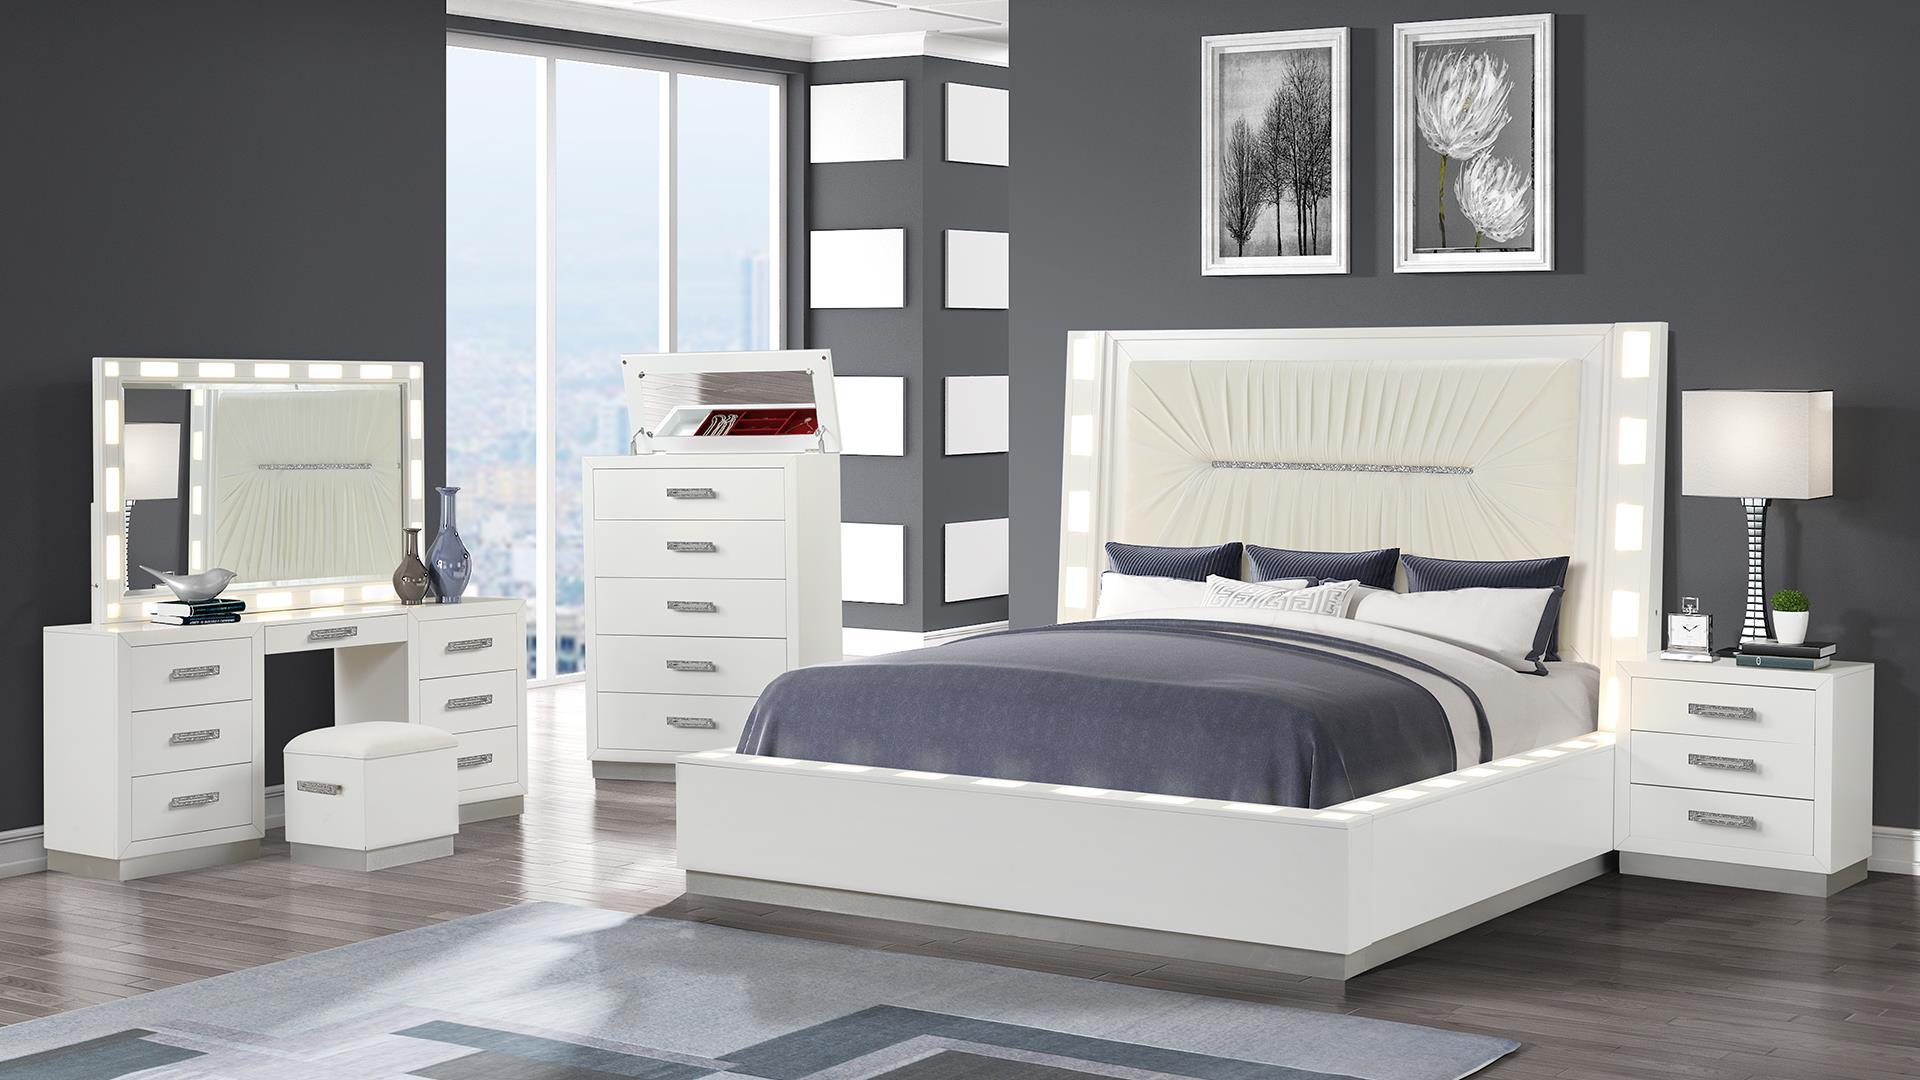 

    
COCO-Q-BED Galaxy Home Furniture Platform Bed
